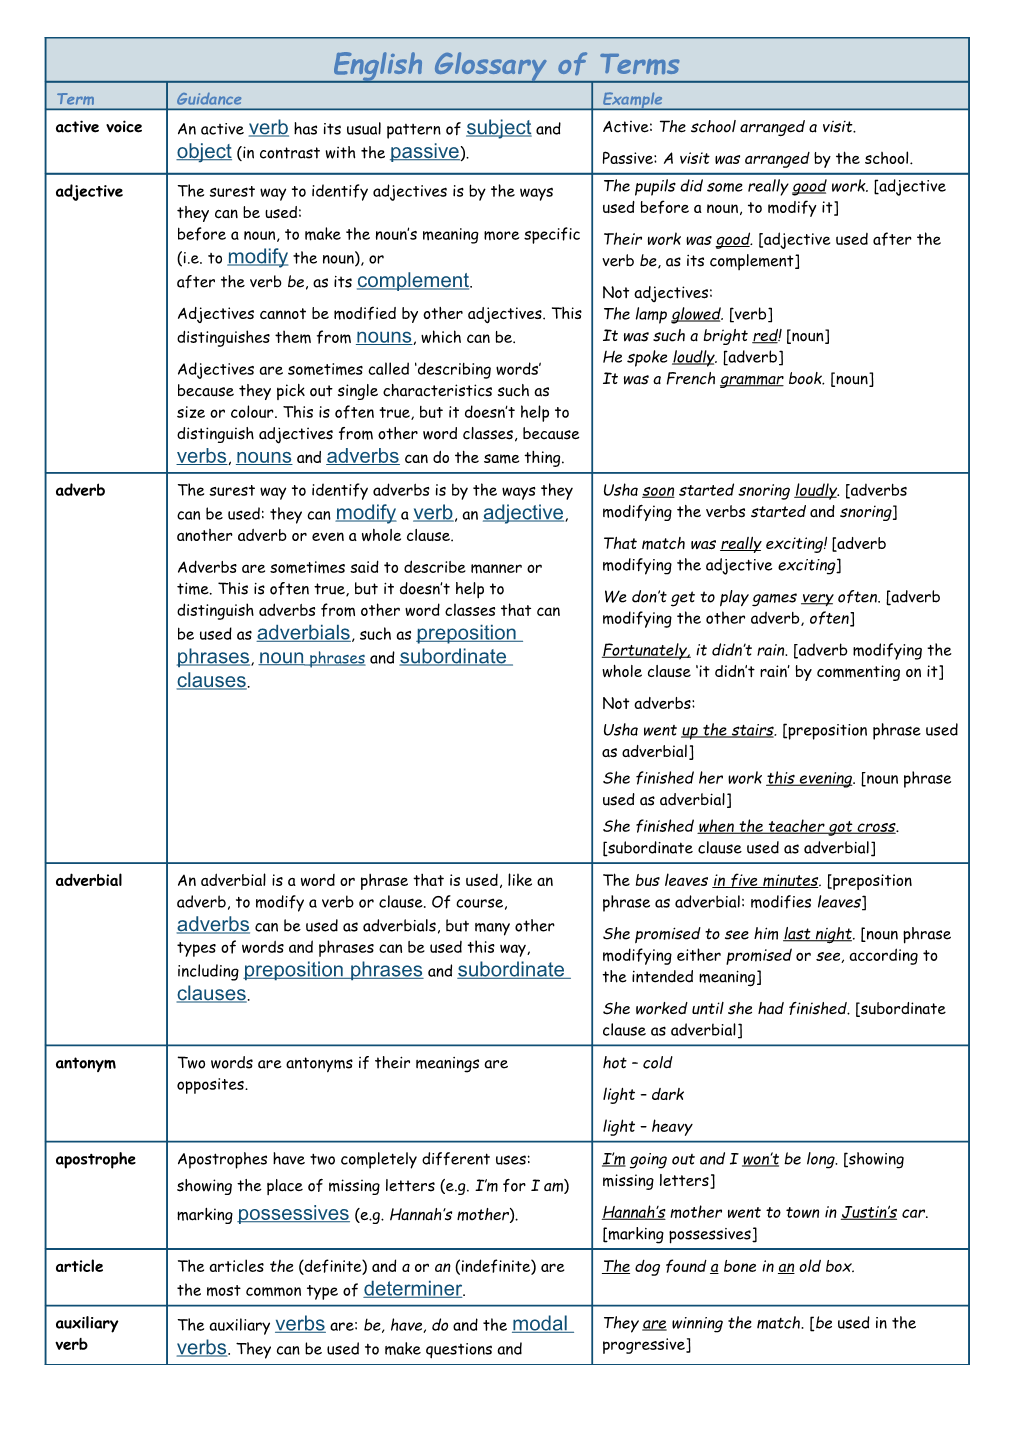 English Glossary of Terms